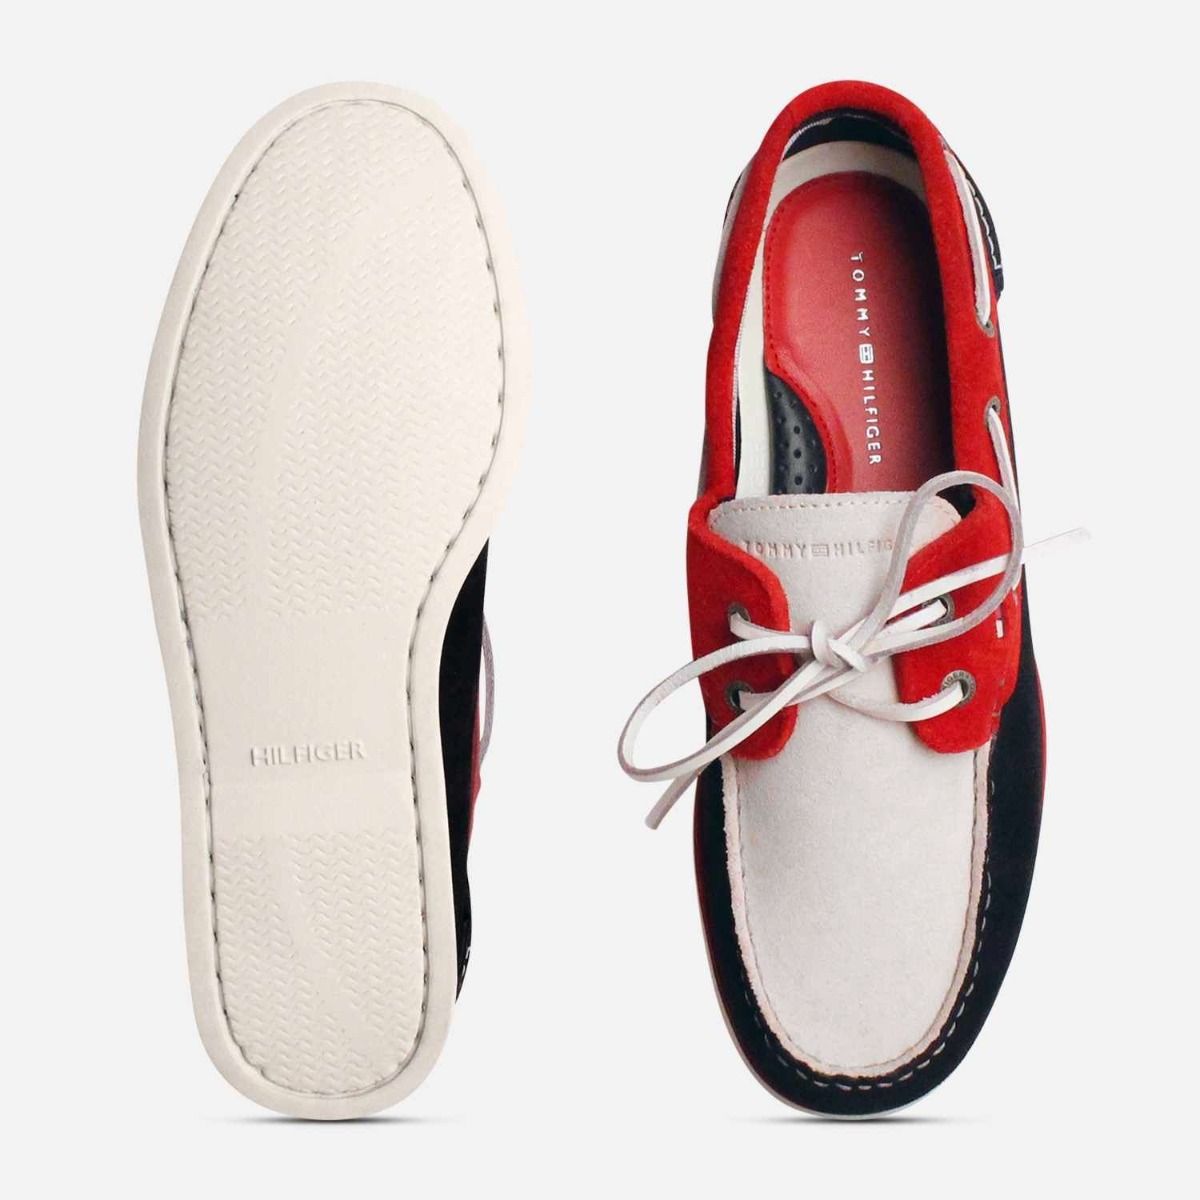 Tommy Hilfiger Red White Blue Suede Shoes